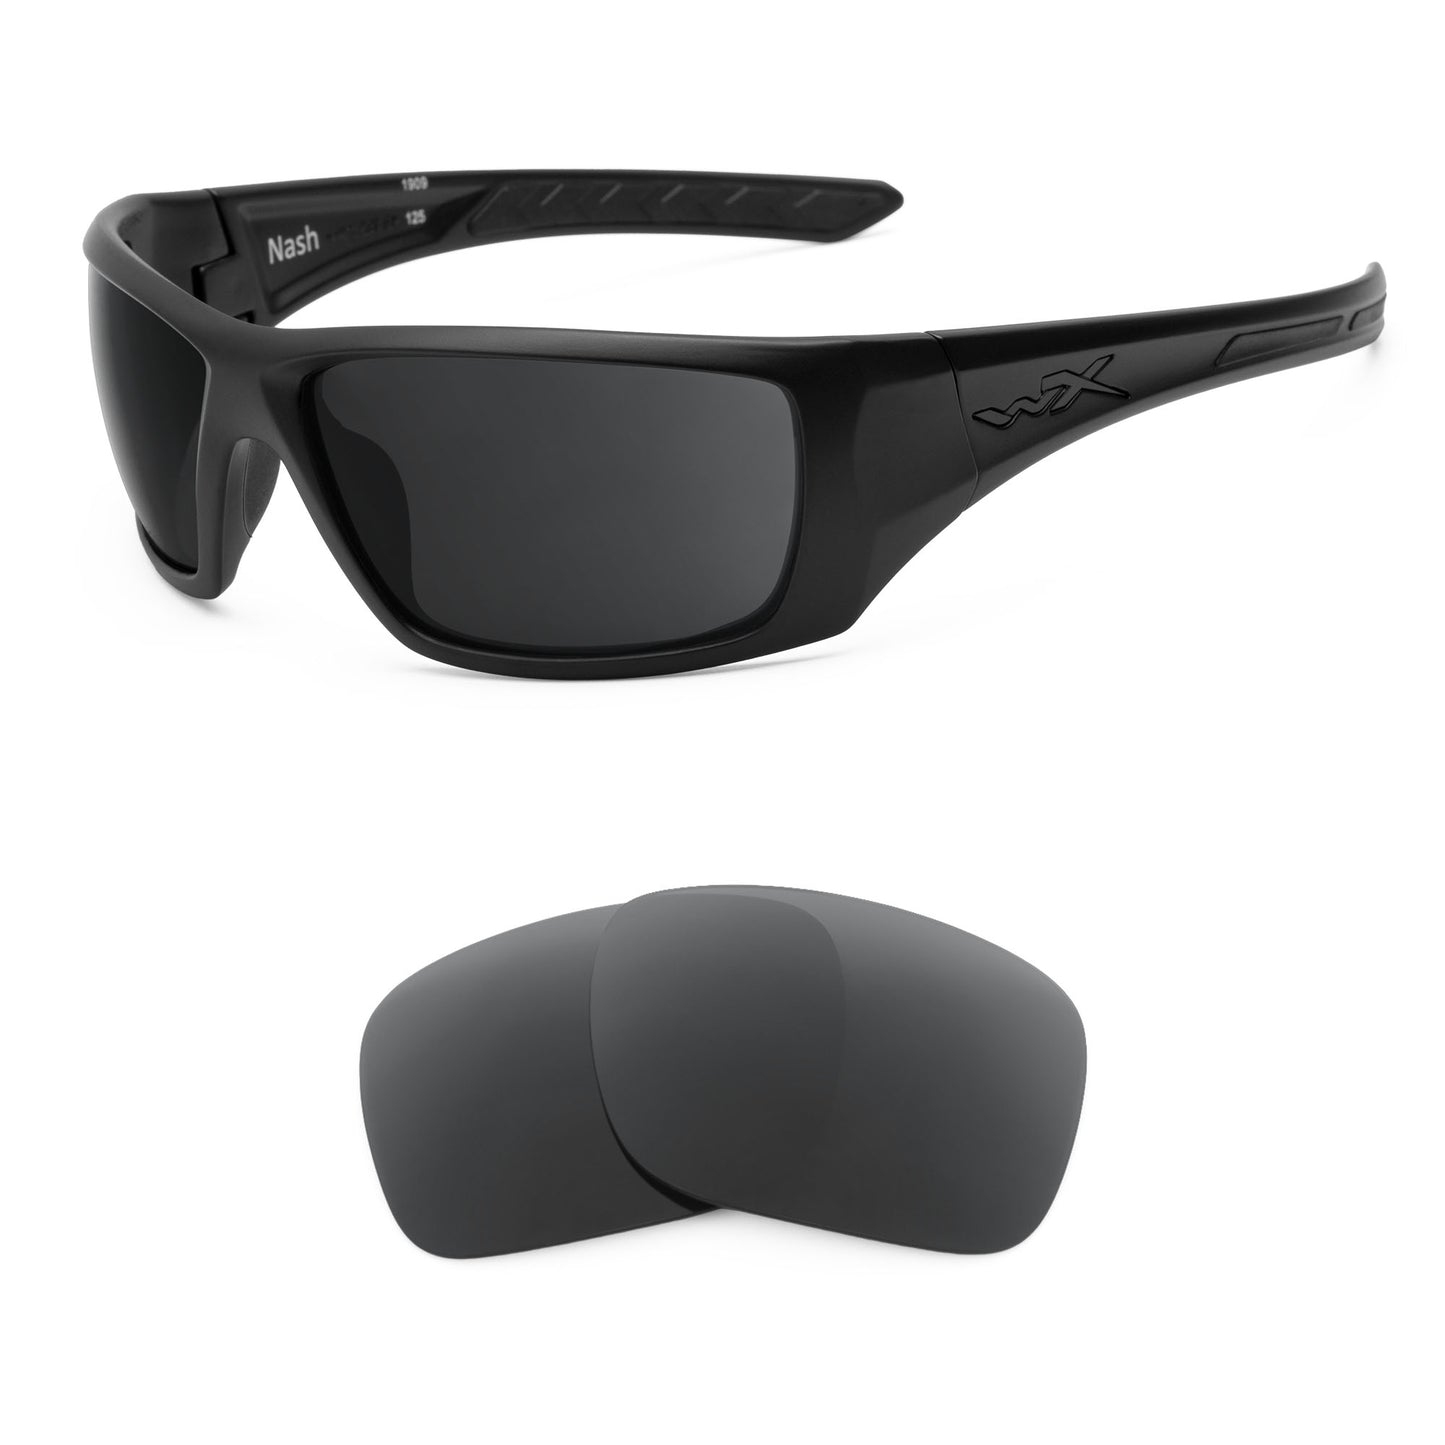 Wiley X Nash sunglasses with replacement lenses